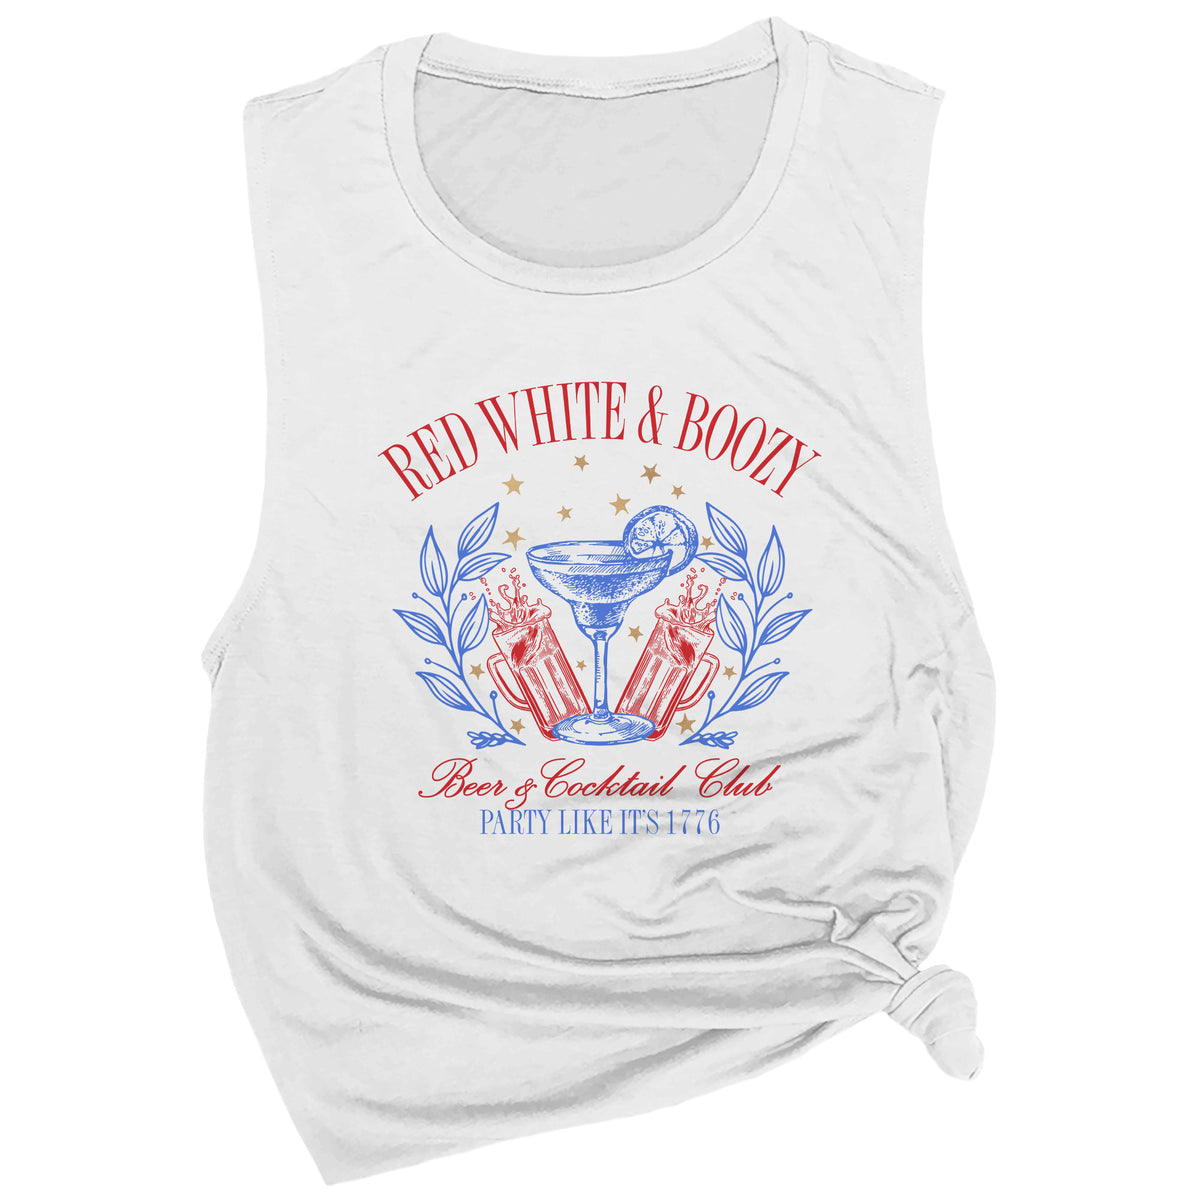 Red White & Boozy, Beer & Cocktail Club Muscle Tee